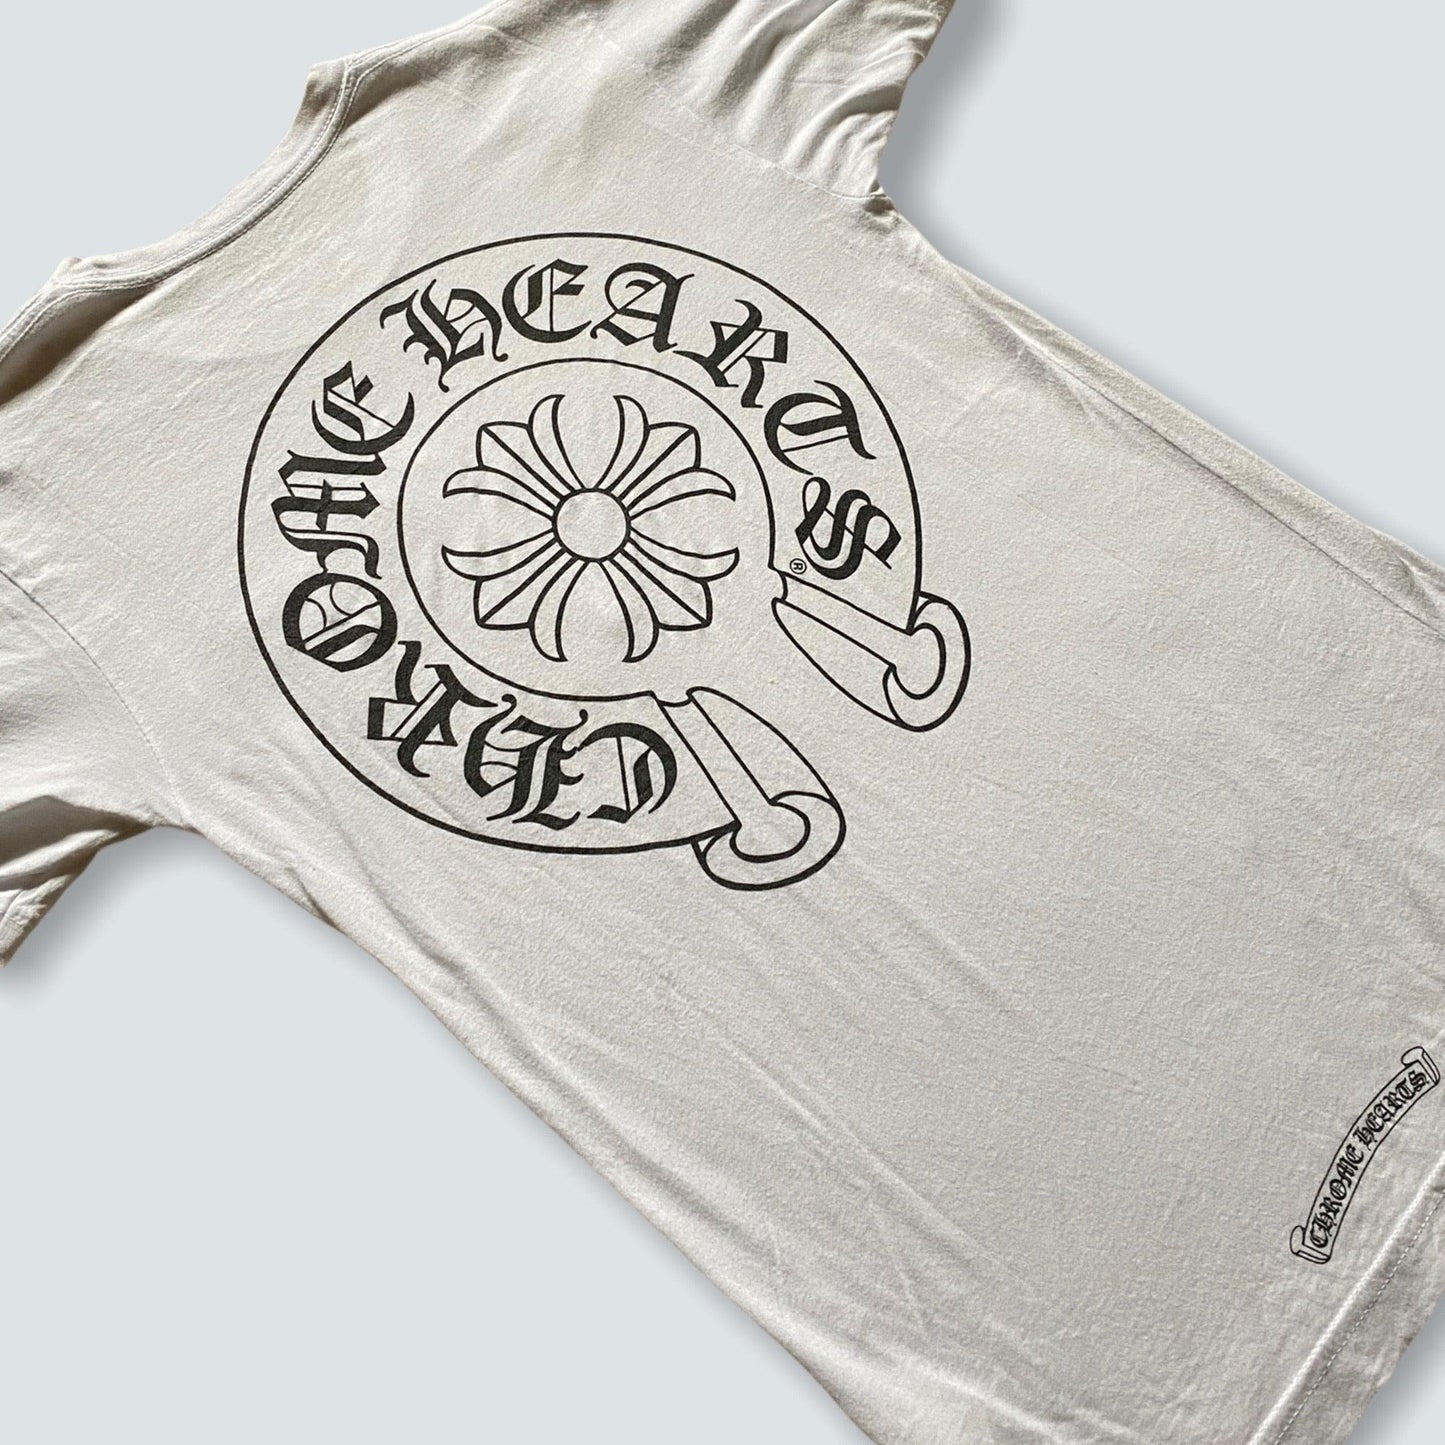 Vintage white chrome hearts horse shoe pocket tee (S) - Known Source